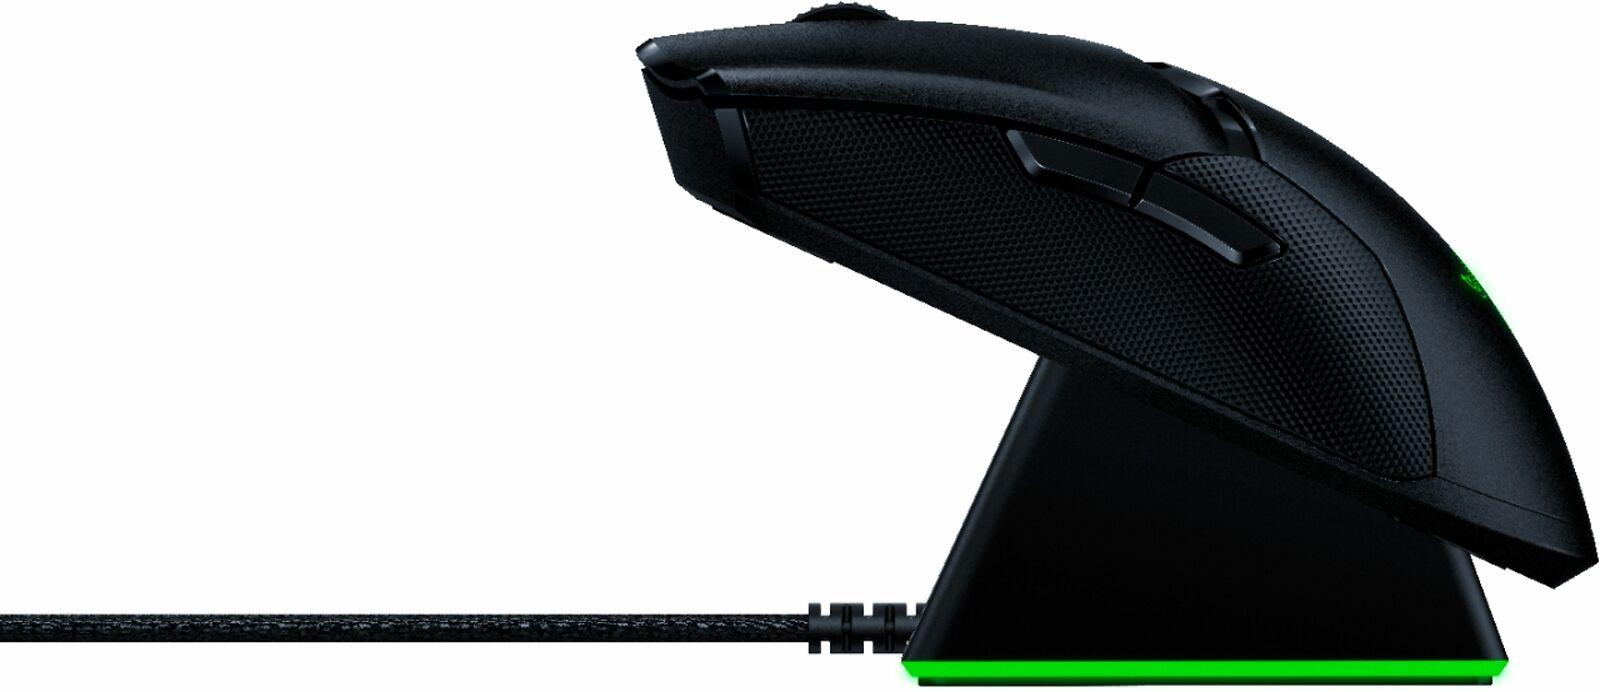 Razer Viper Ultimate Ultralight Wireless Optical Gaming Mouse for $99.99 Shipped